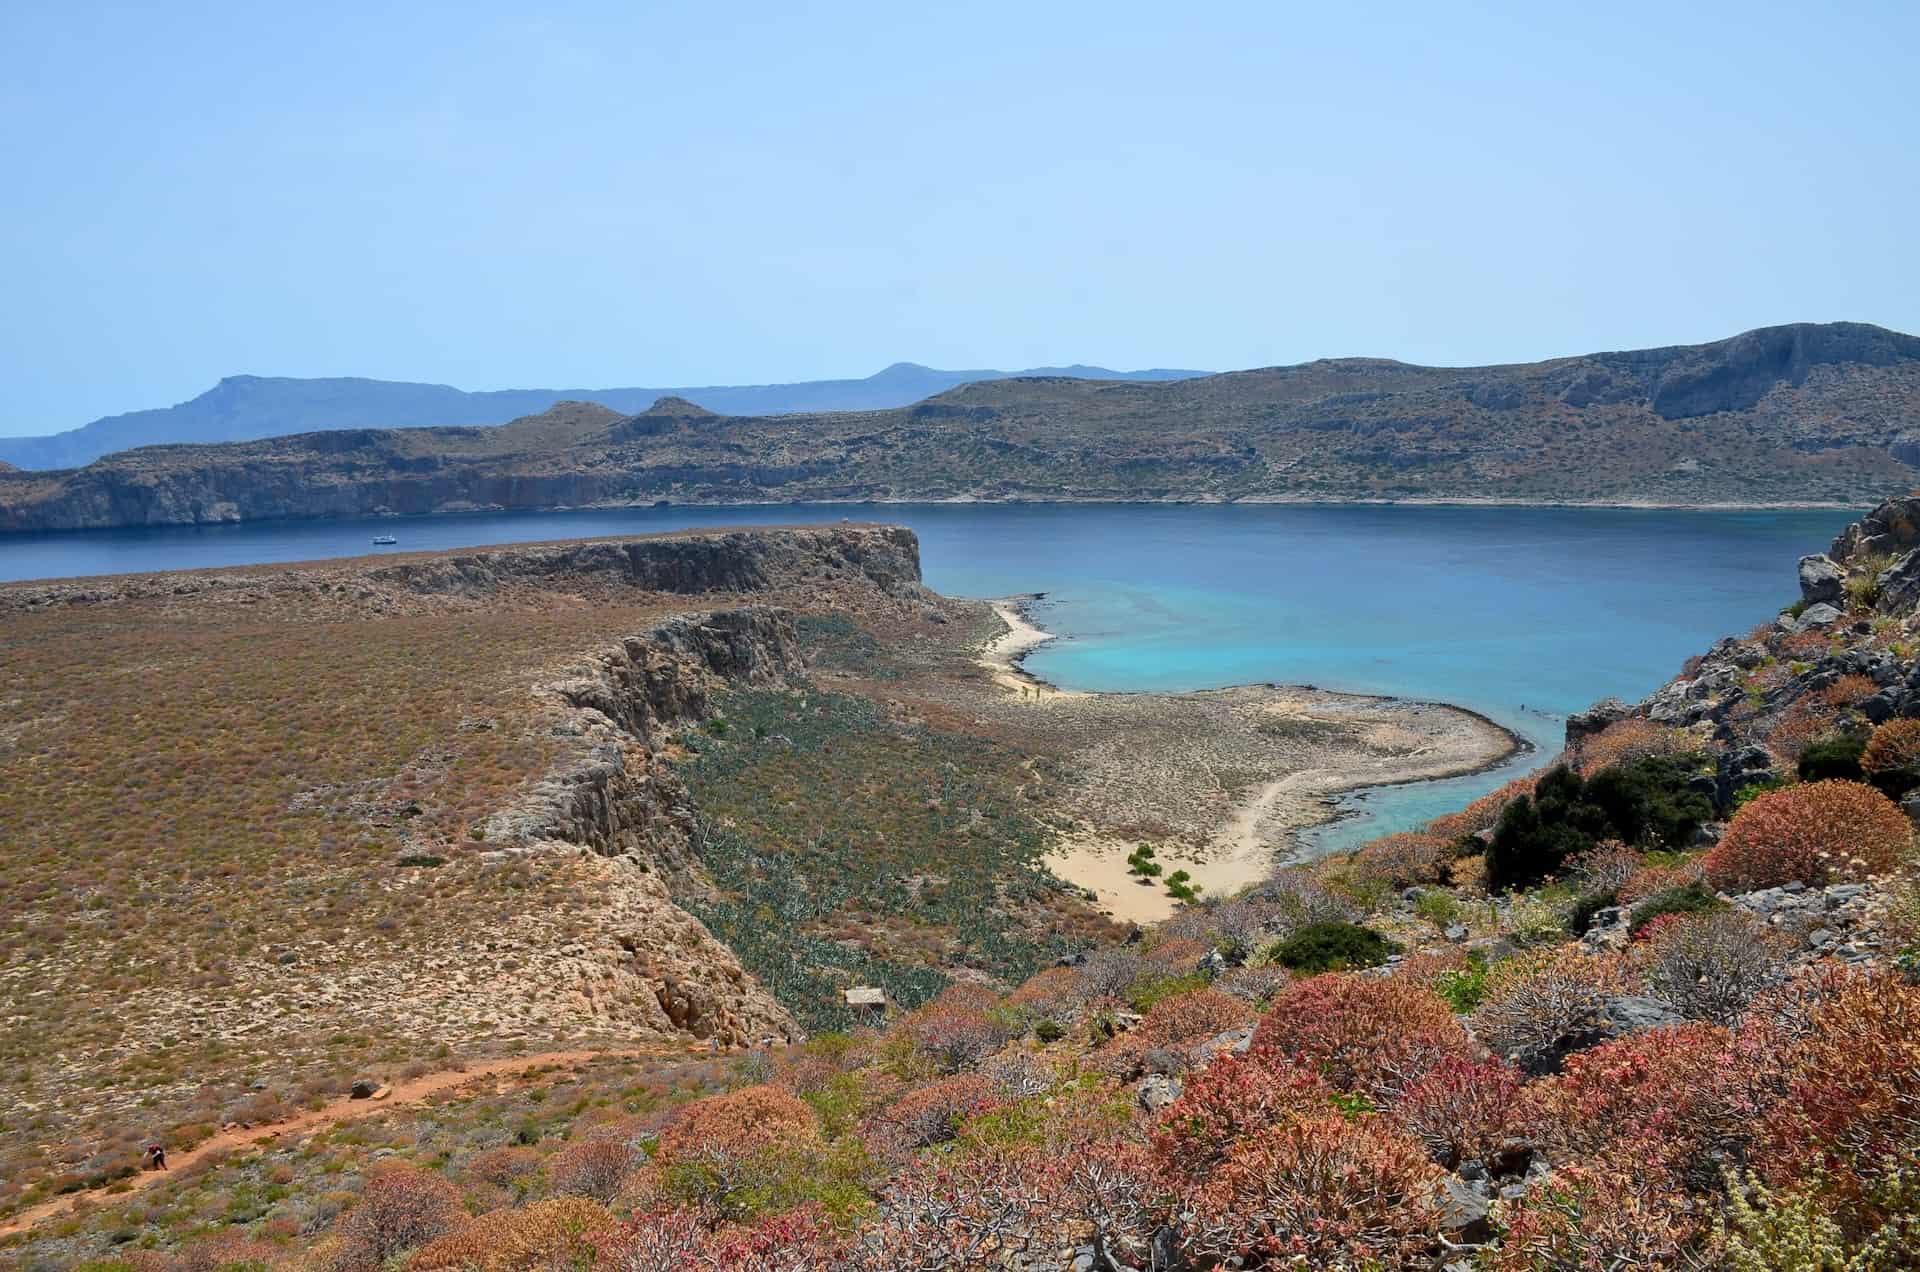 View from near the end of the trail at Gramvousa, Crete